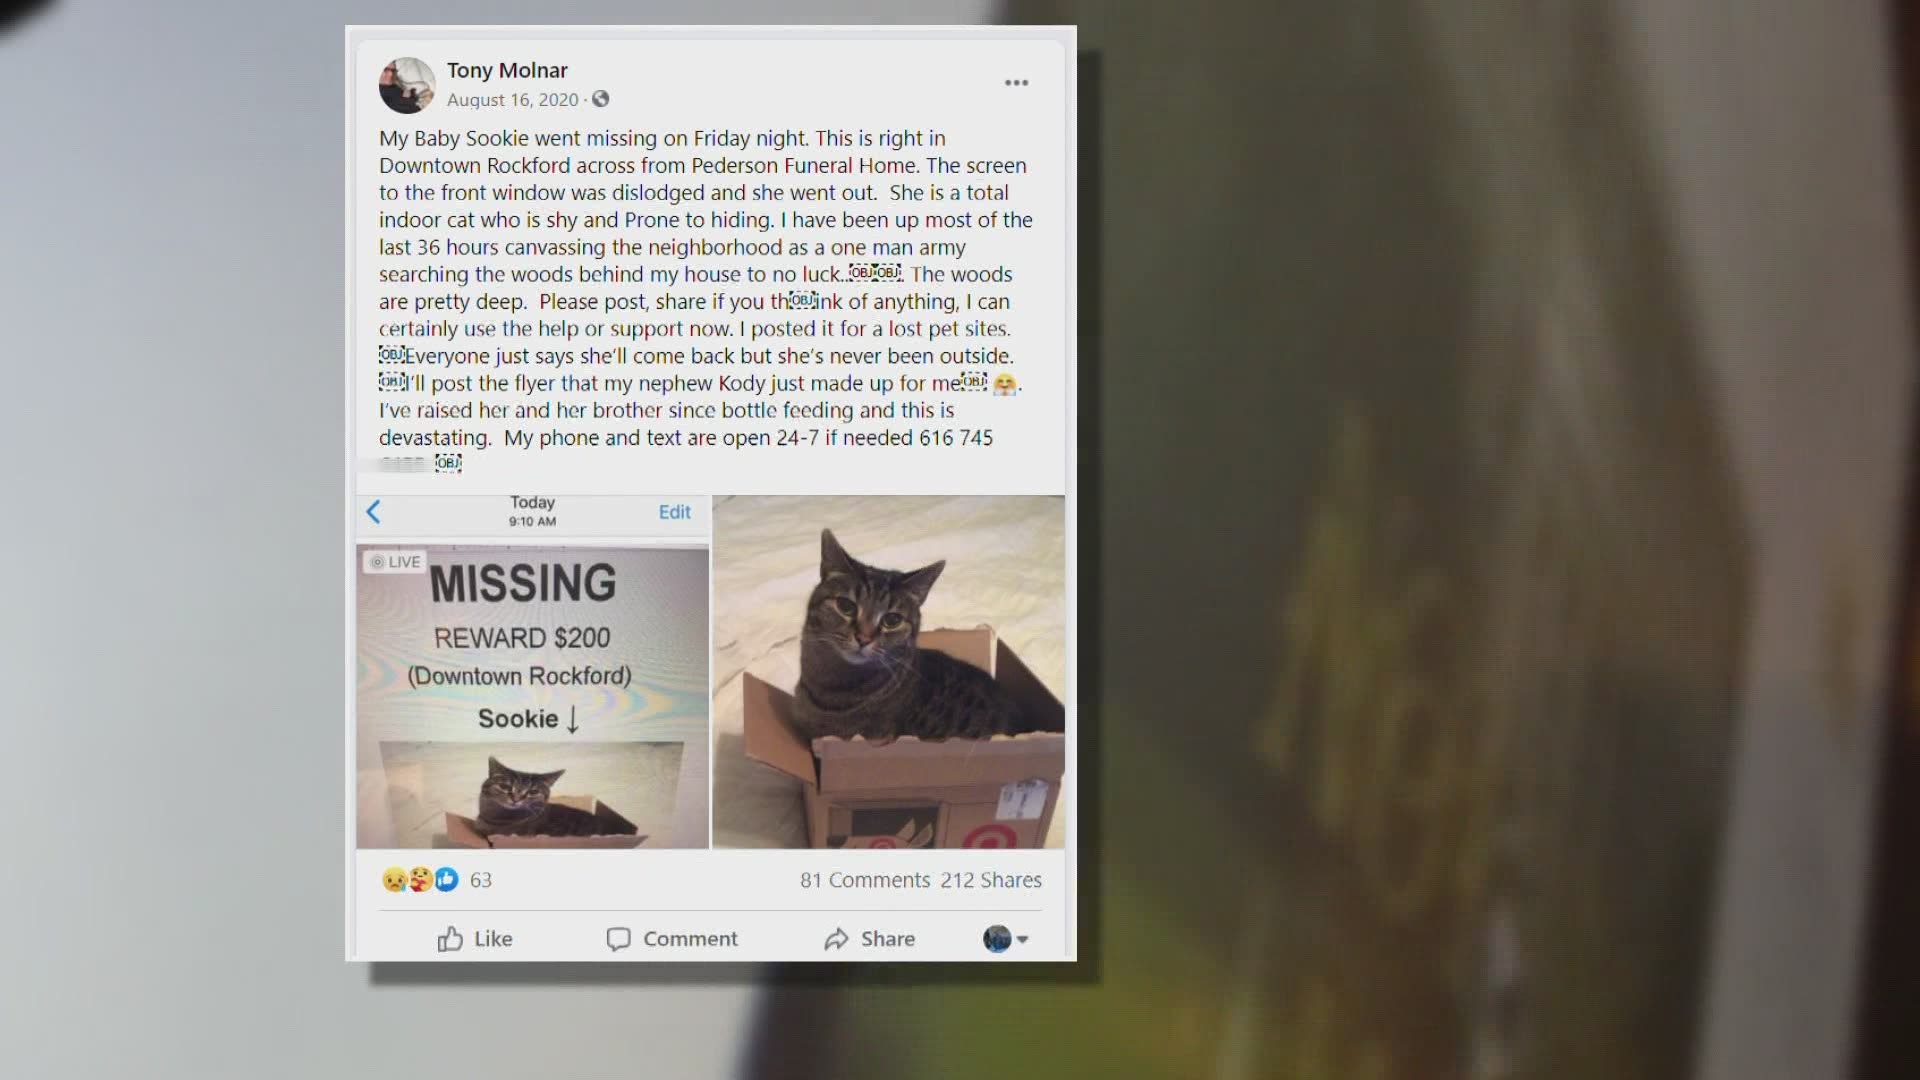 Sookie the cat escaped from Tony Molnar's Rockford home in August 2020. Five months later, the cat was found, thanks to an online community never giving up.